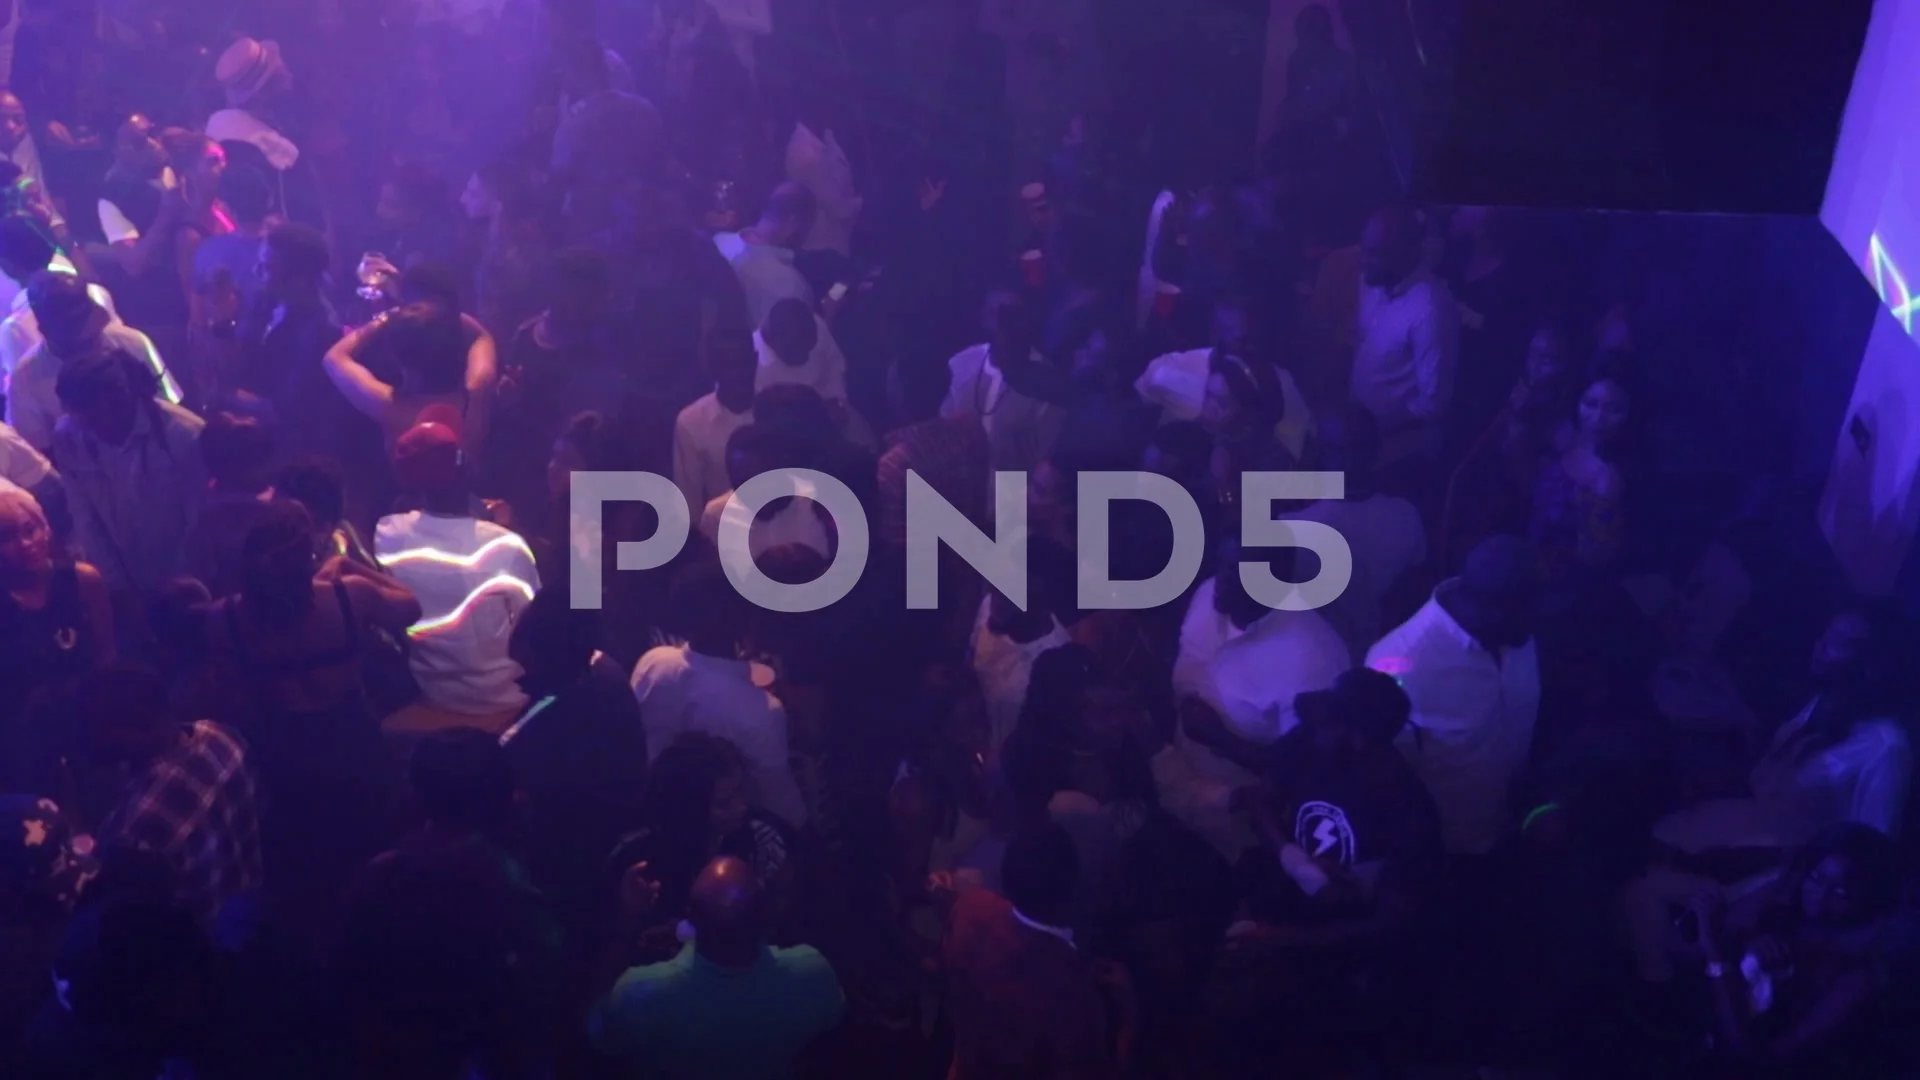 Crowded Dance Club Stock Video Footage | Royalty Free Crowded Dance Club  Videos | Pond5